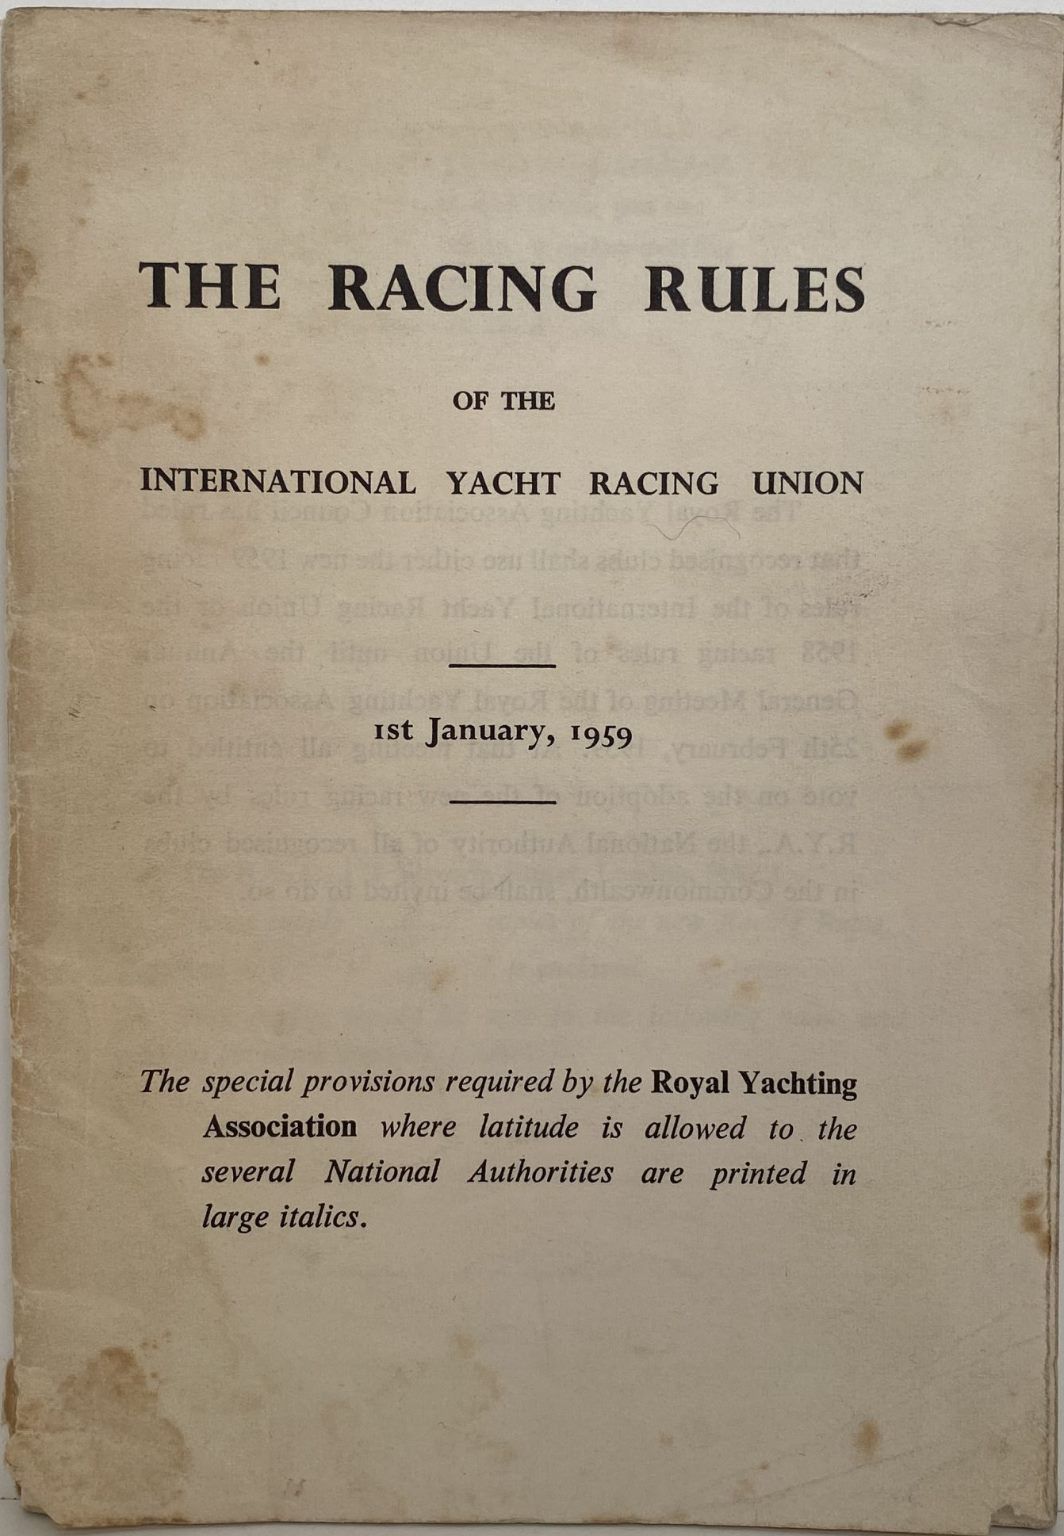 The Racing Rules of the International Yacht Racing Union 1959